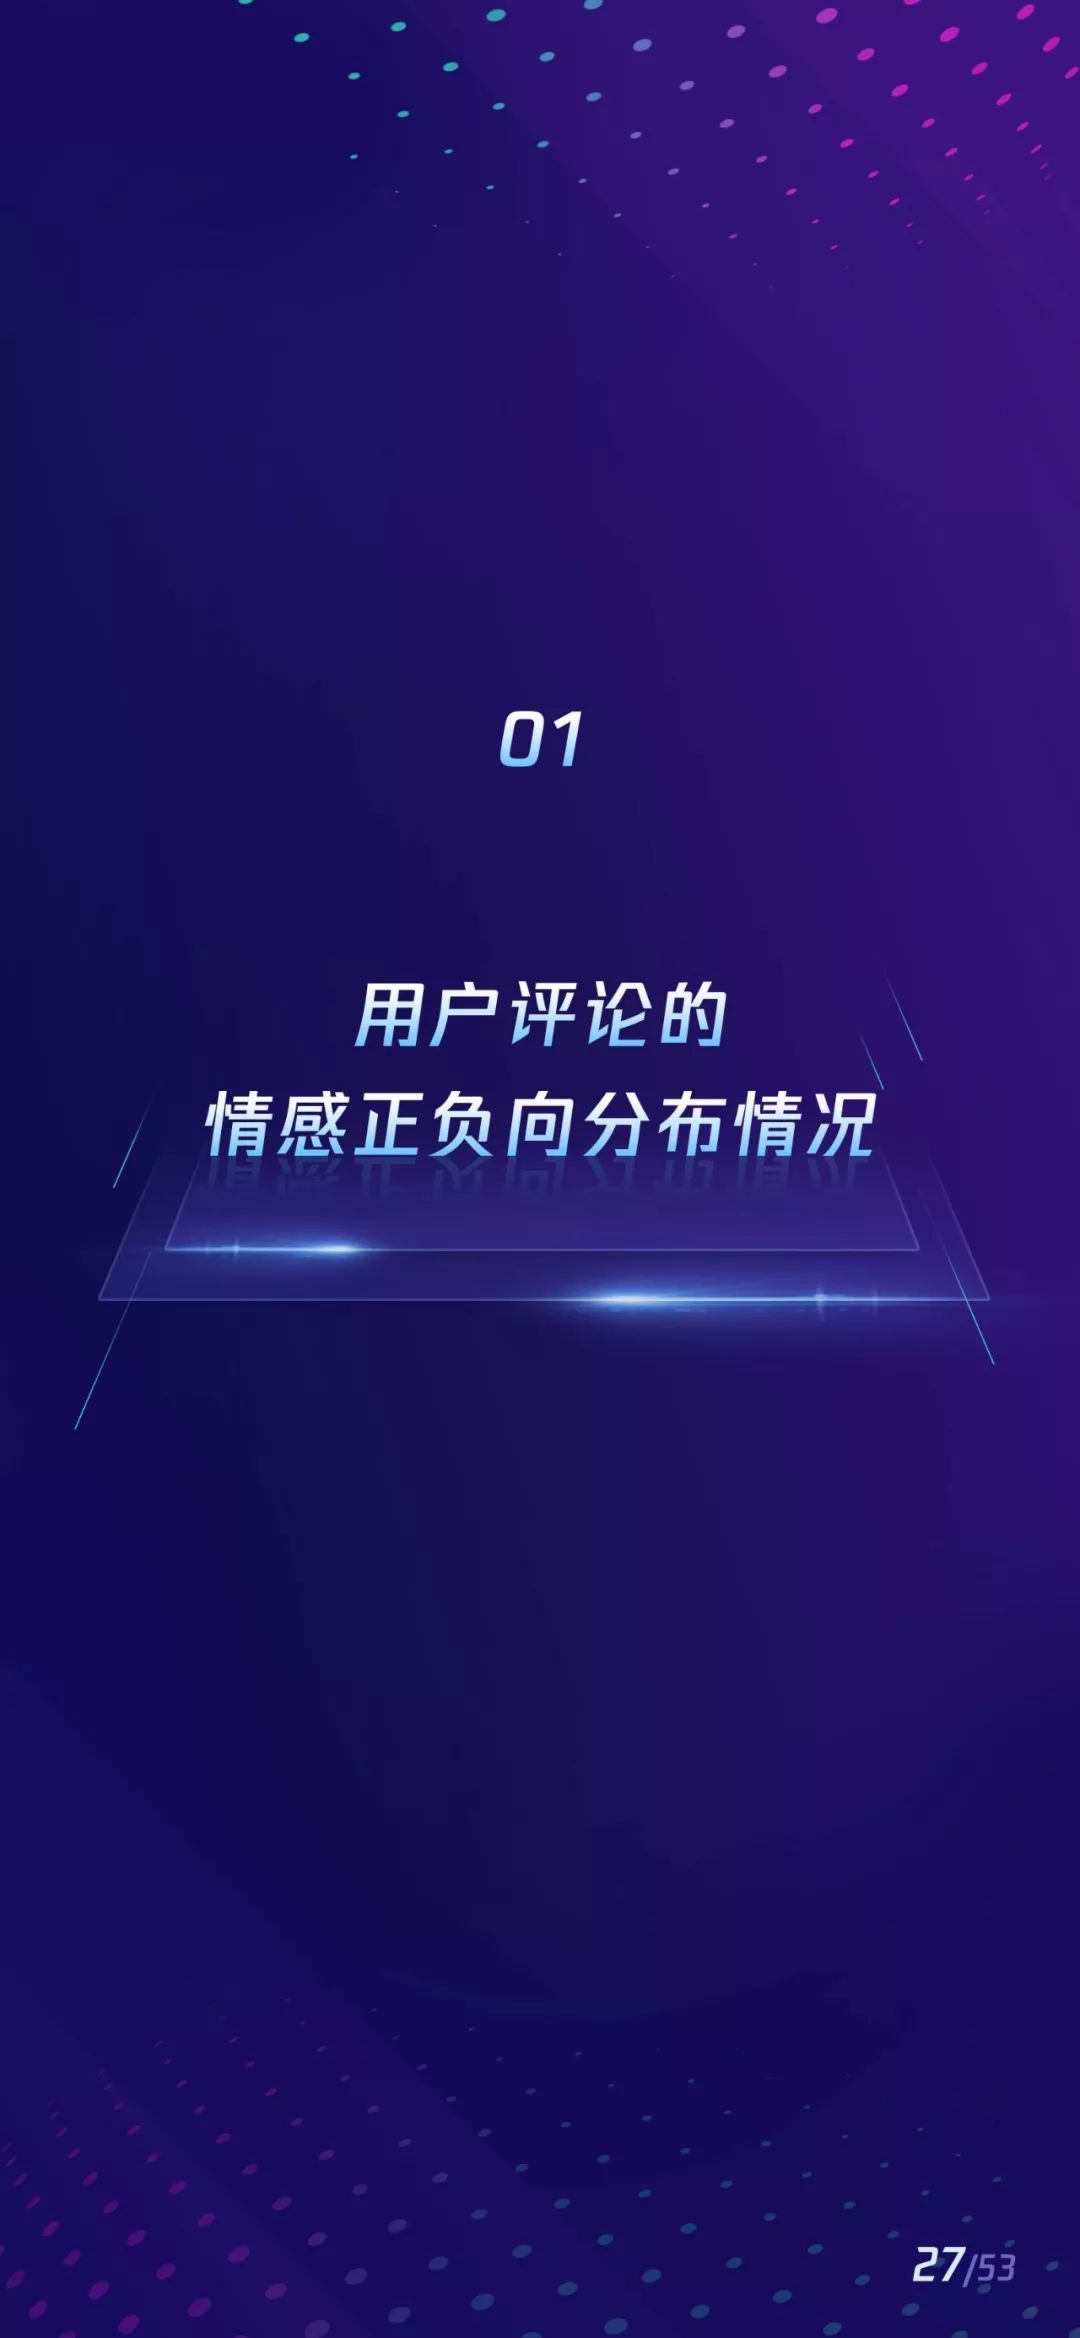 Tencent News ConTech Data Labs Releases 2019 Education New Ecological Content Dissemination Report